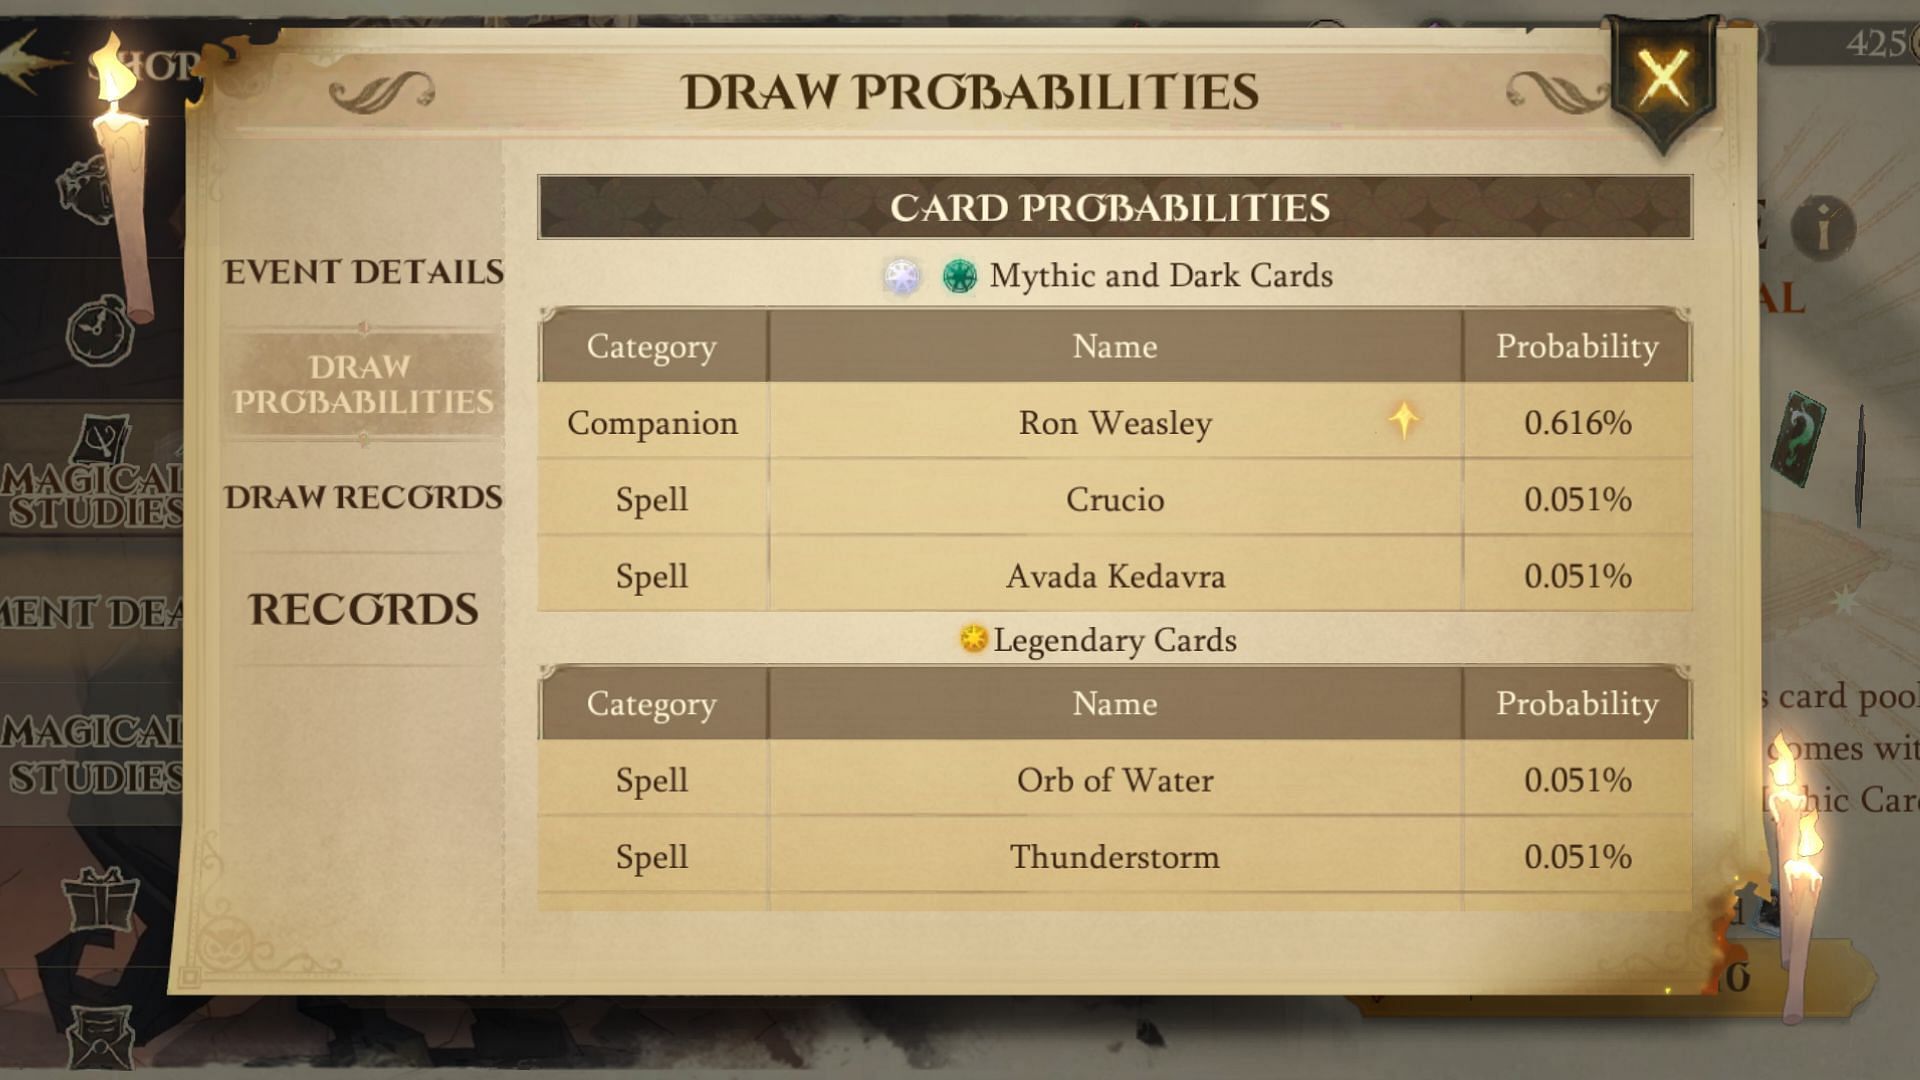 These are the probabilities of Mythic and Dark cards (Image via Harry Potter Magic Awakened)